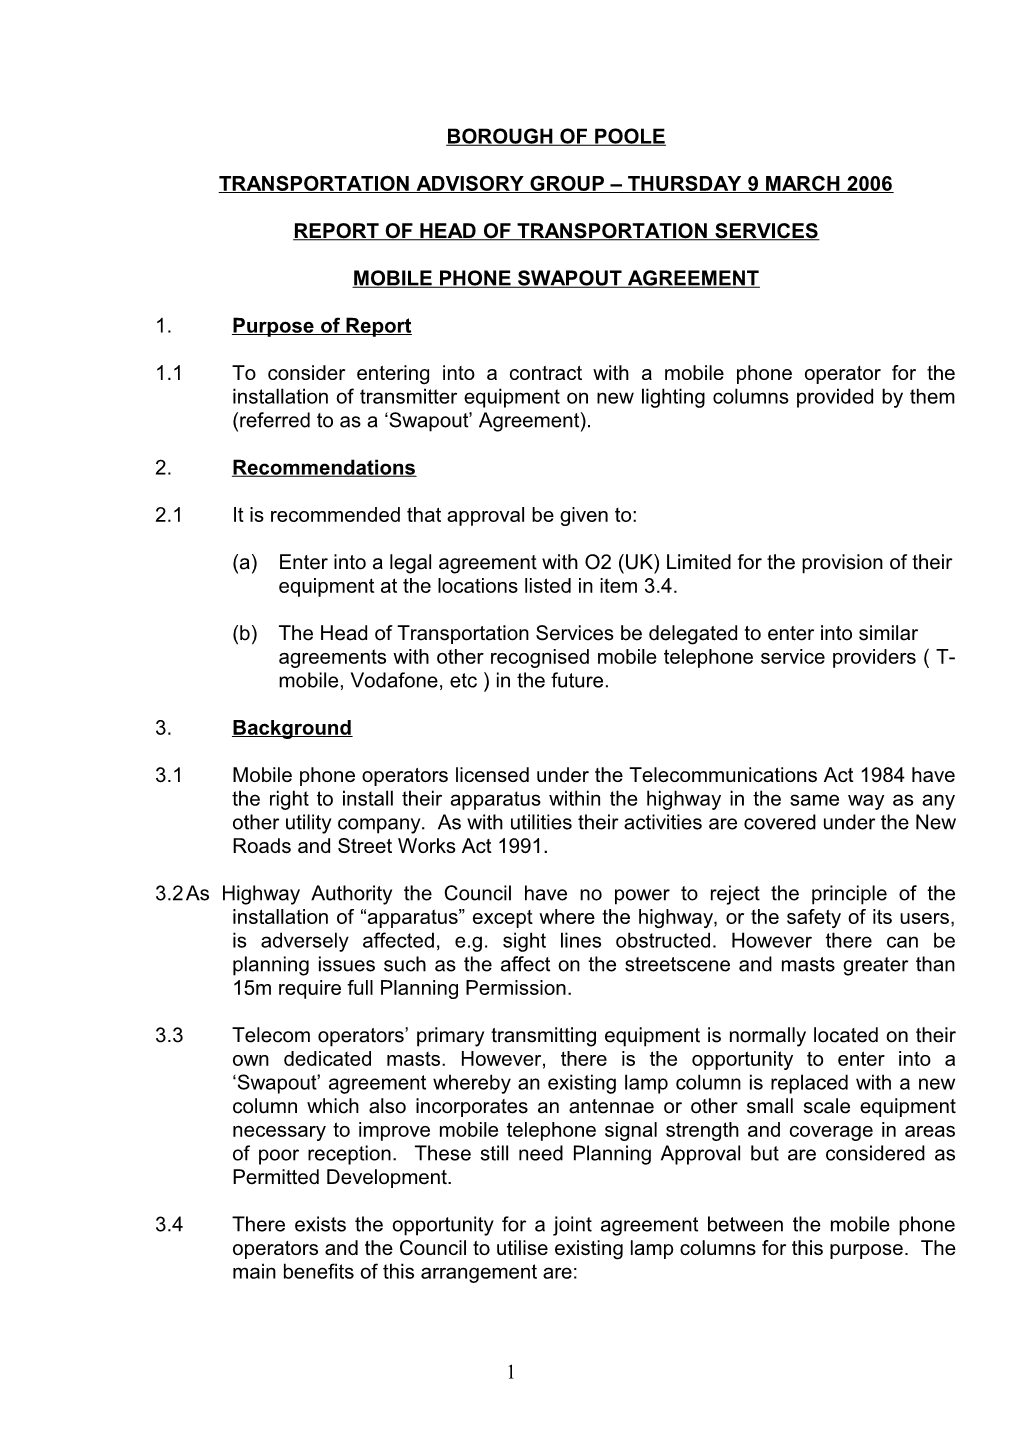 Mobile Phone Swapout Agreement